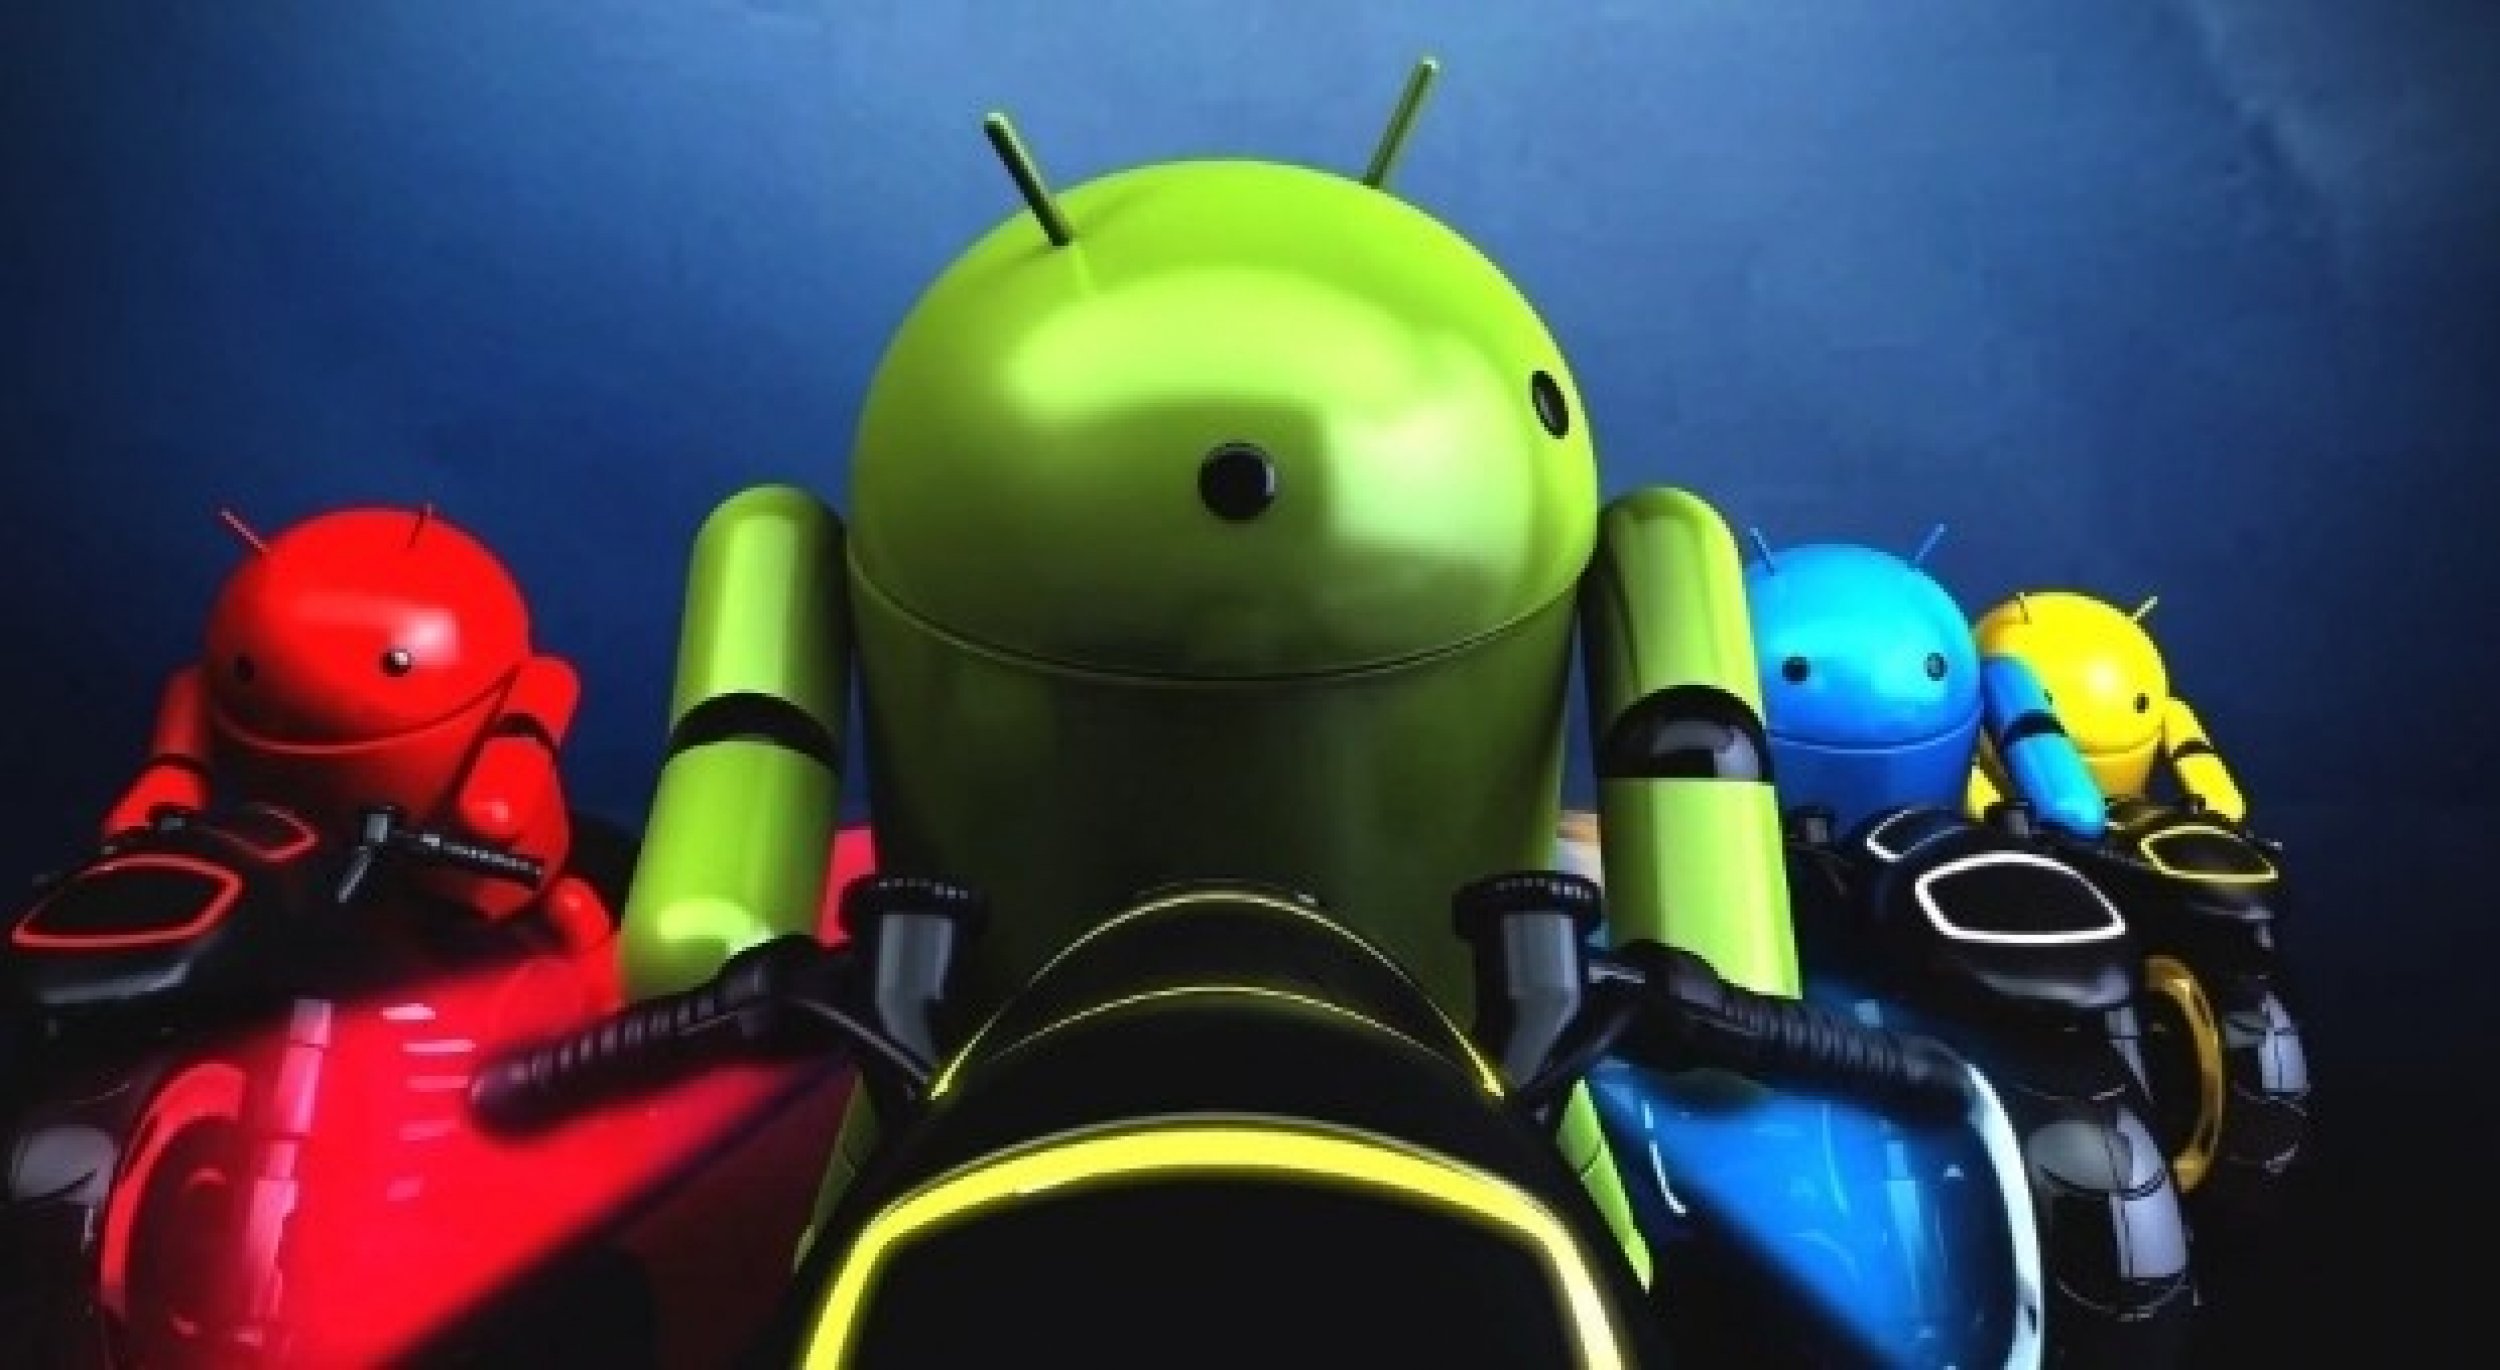 Googles Android Mobile Operating System